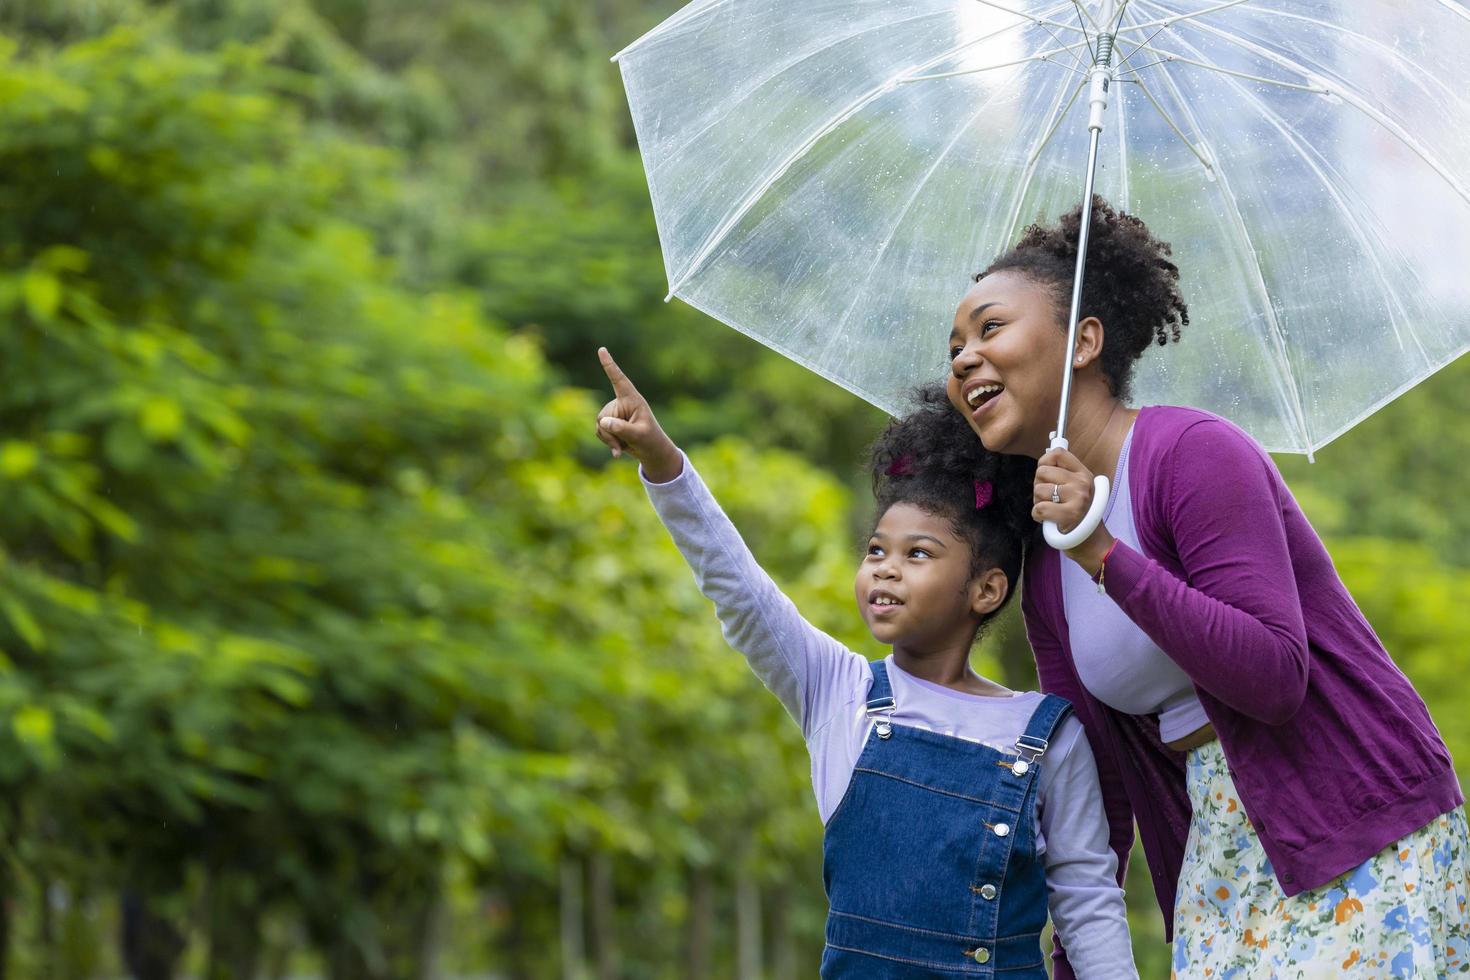 African American mother is enjoy walking with her young daughter with umbrella in the public park for wellbeing and happiness concept photo